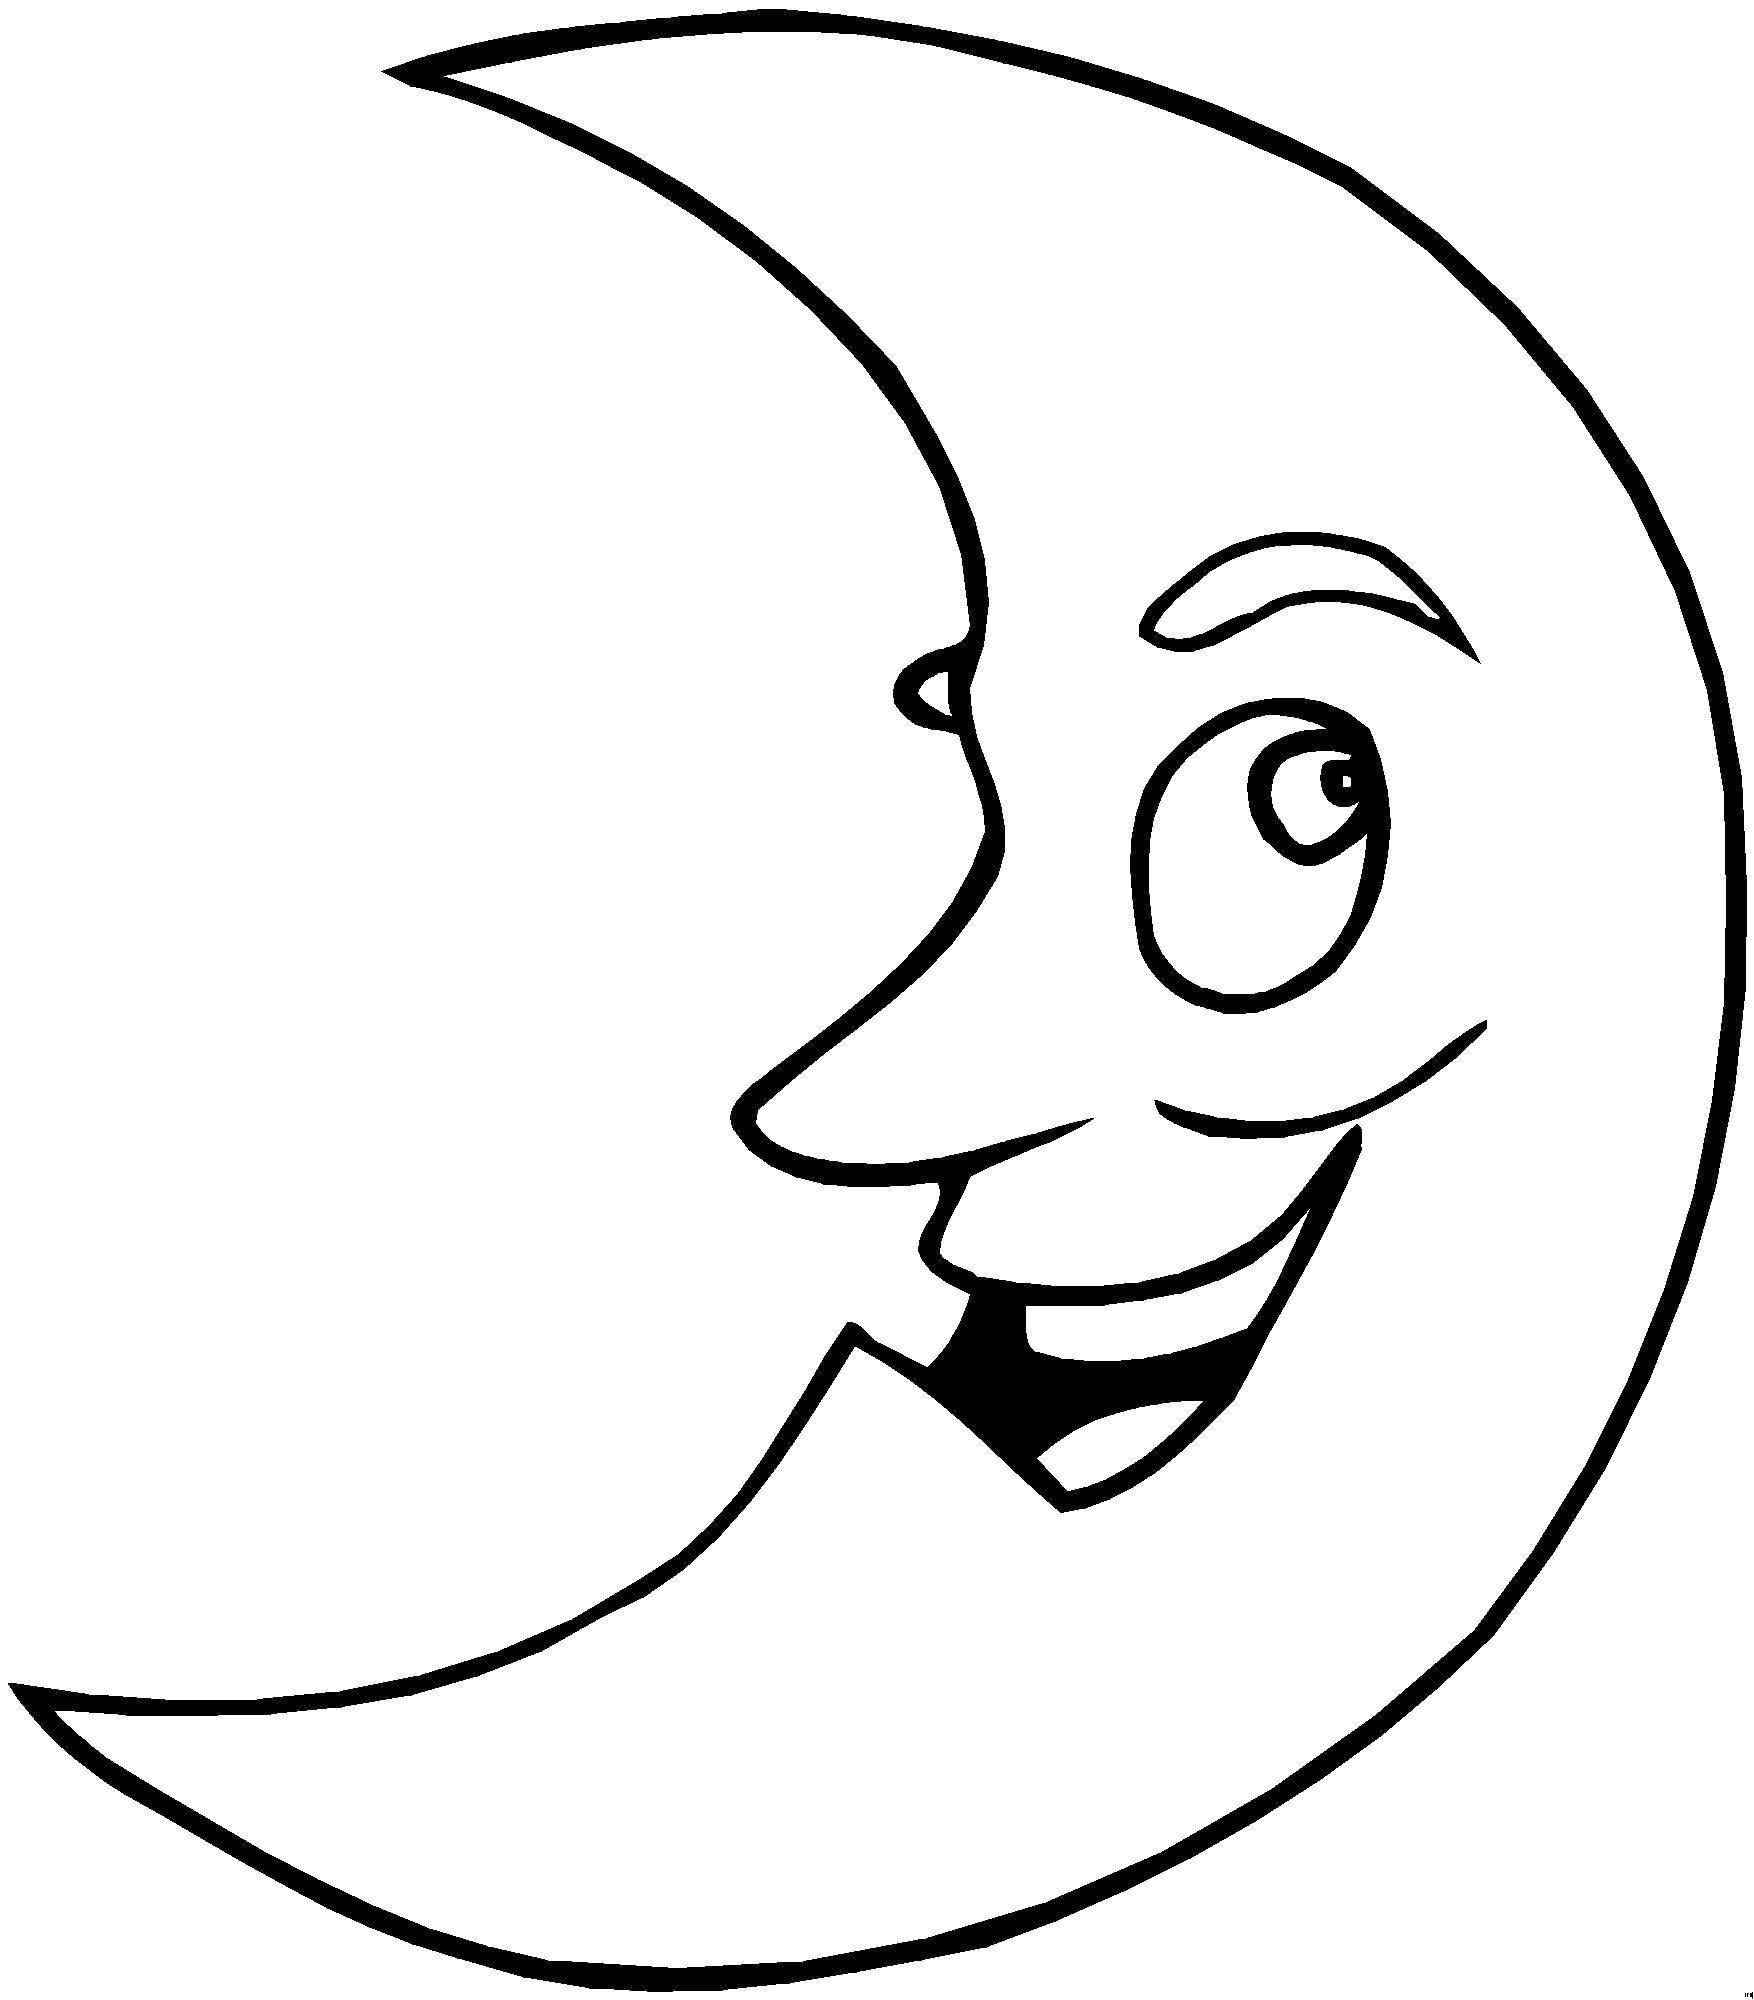 Coloring Month smiles. Category moon. Tags:  smile month.